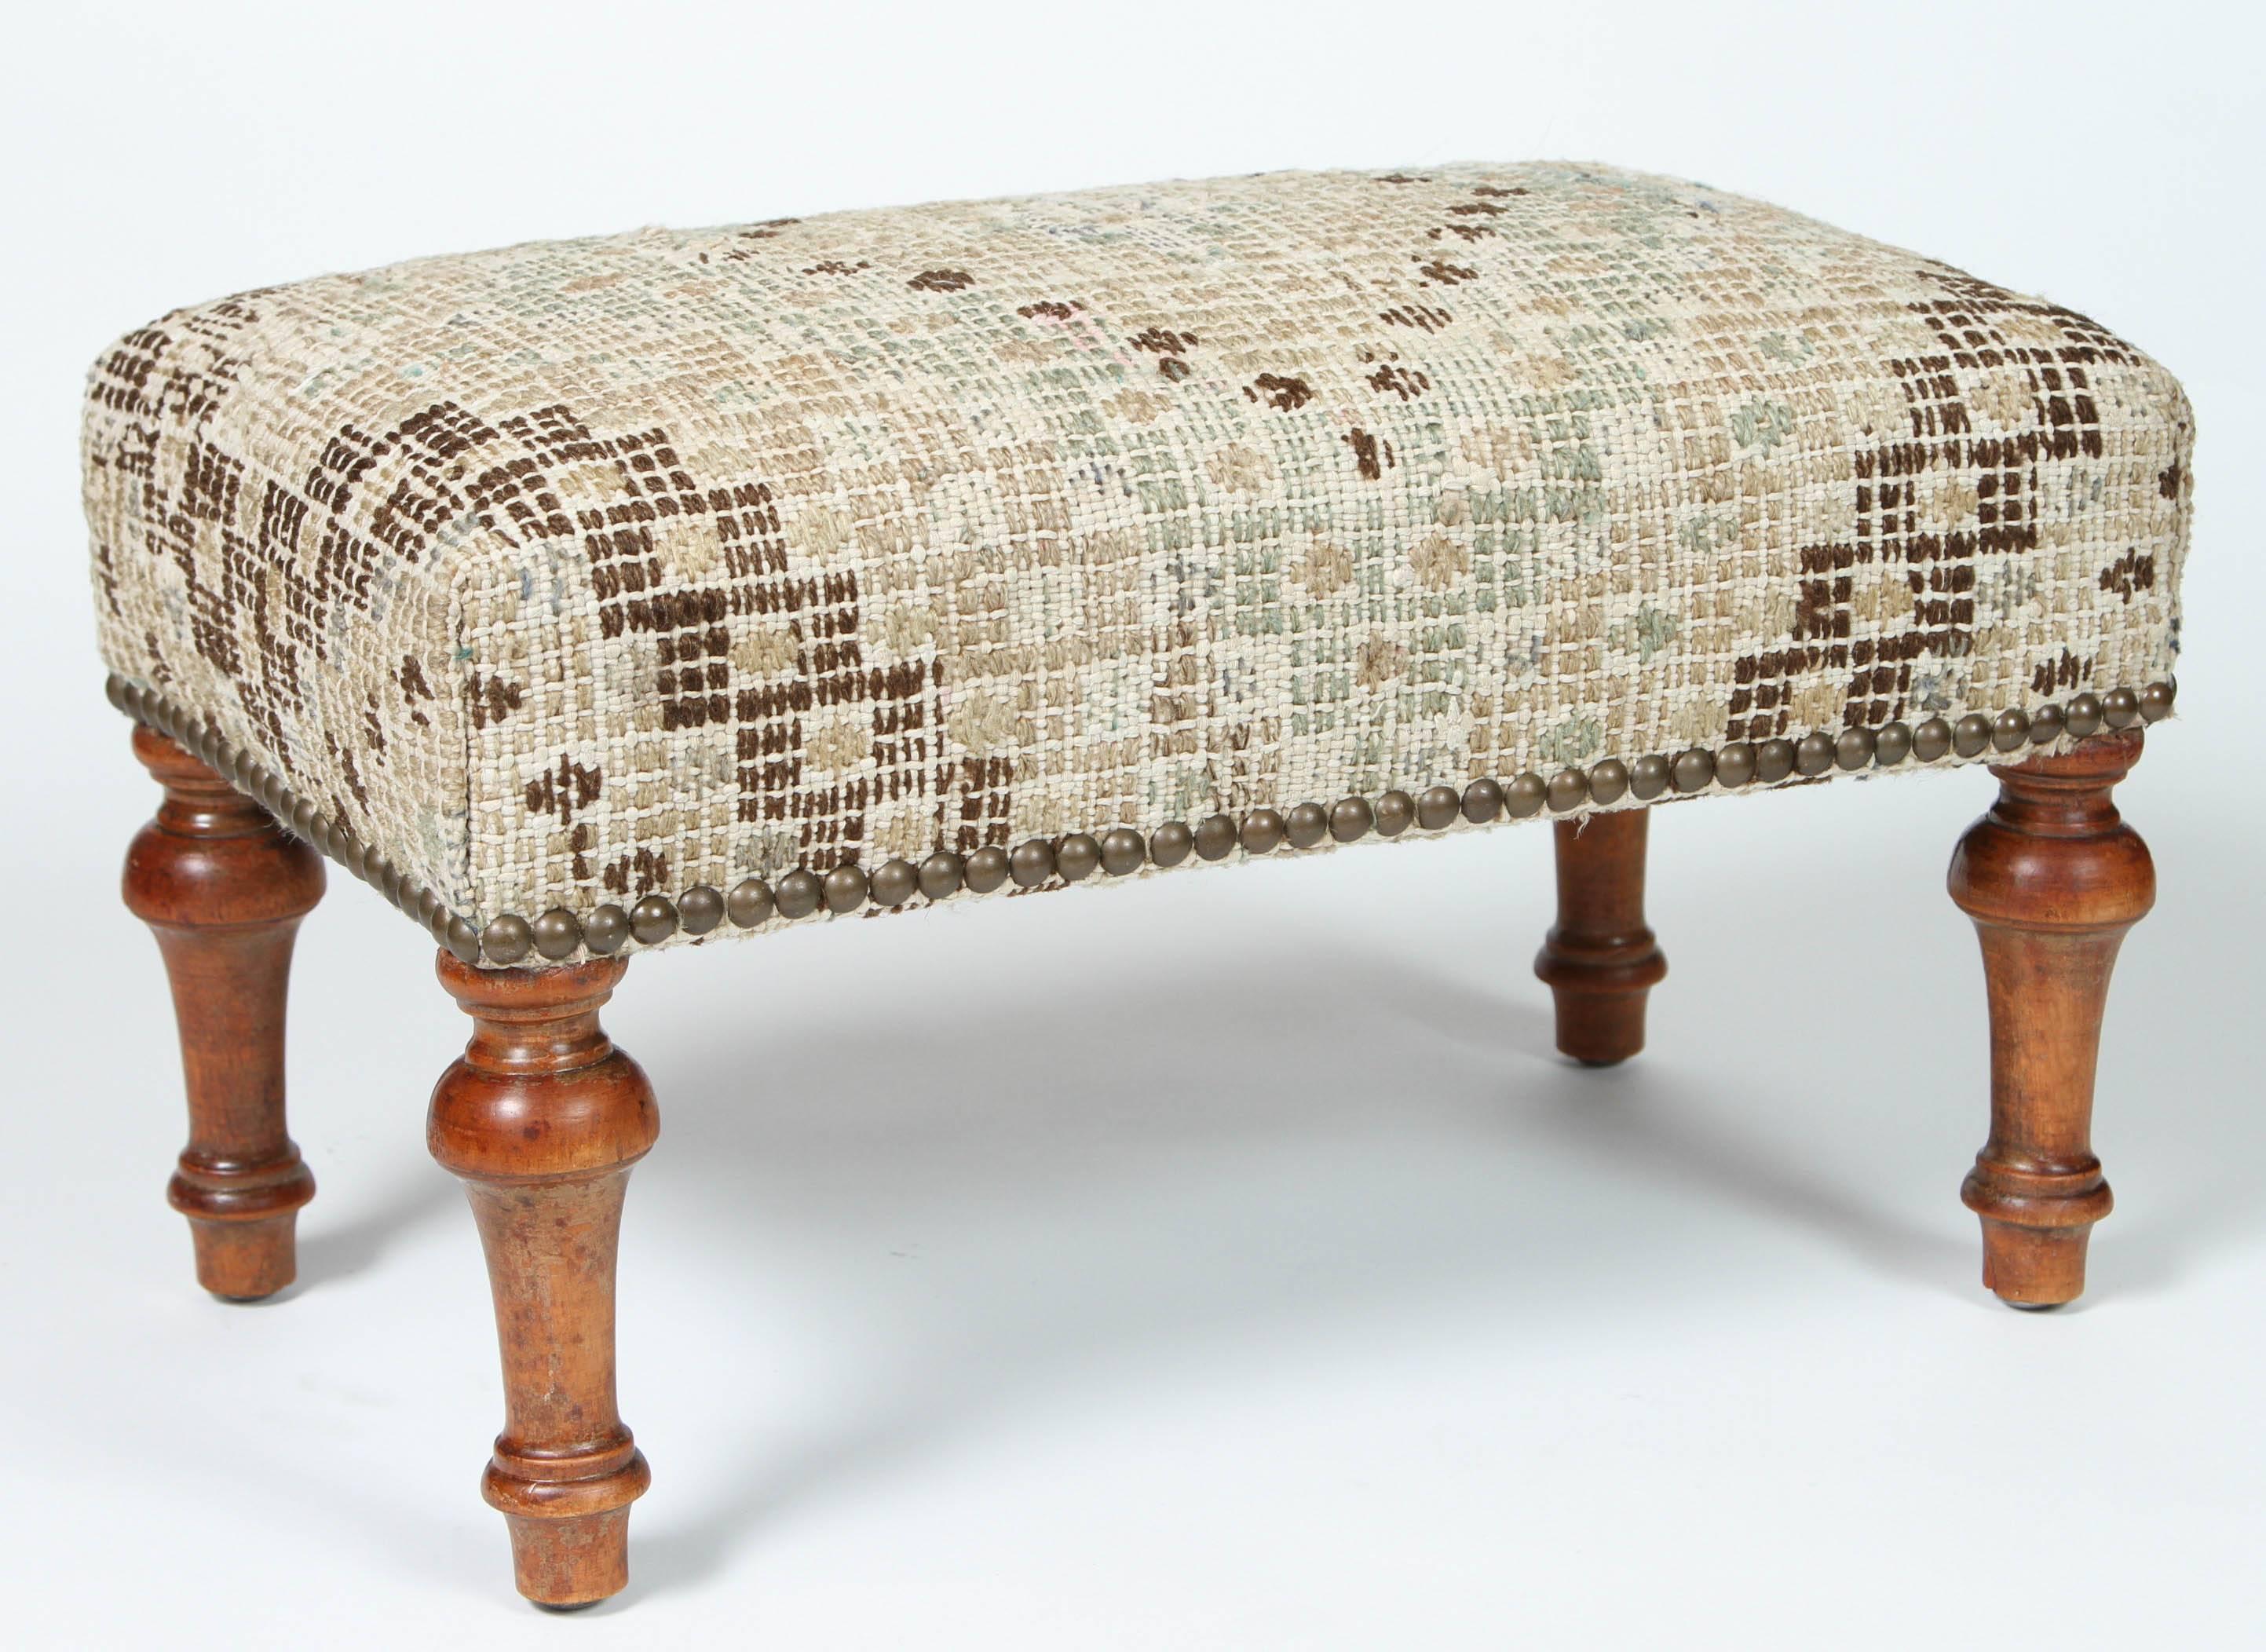 Vintage footstool with turned legs, newly upholstered in Turkish cotton and wool rug with diamond pattern and nailhead trim.